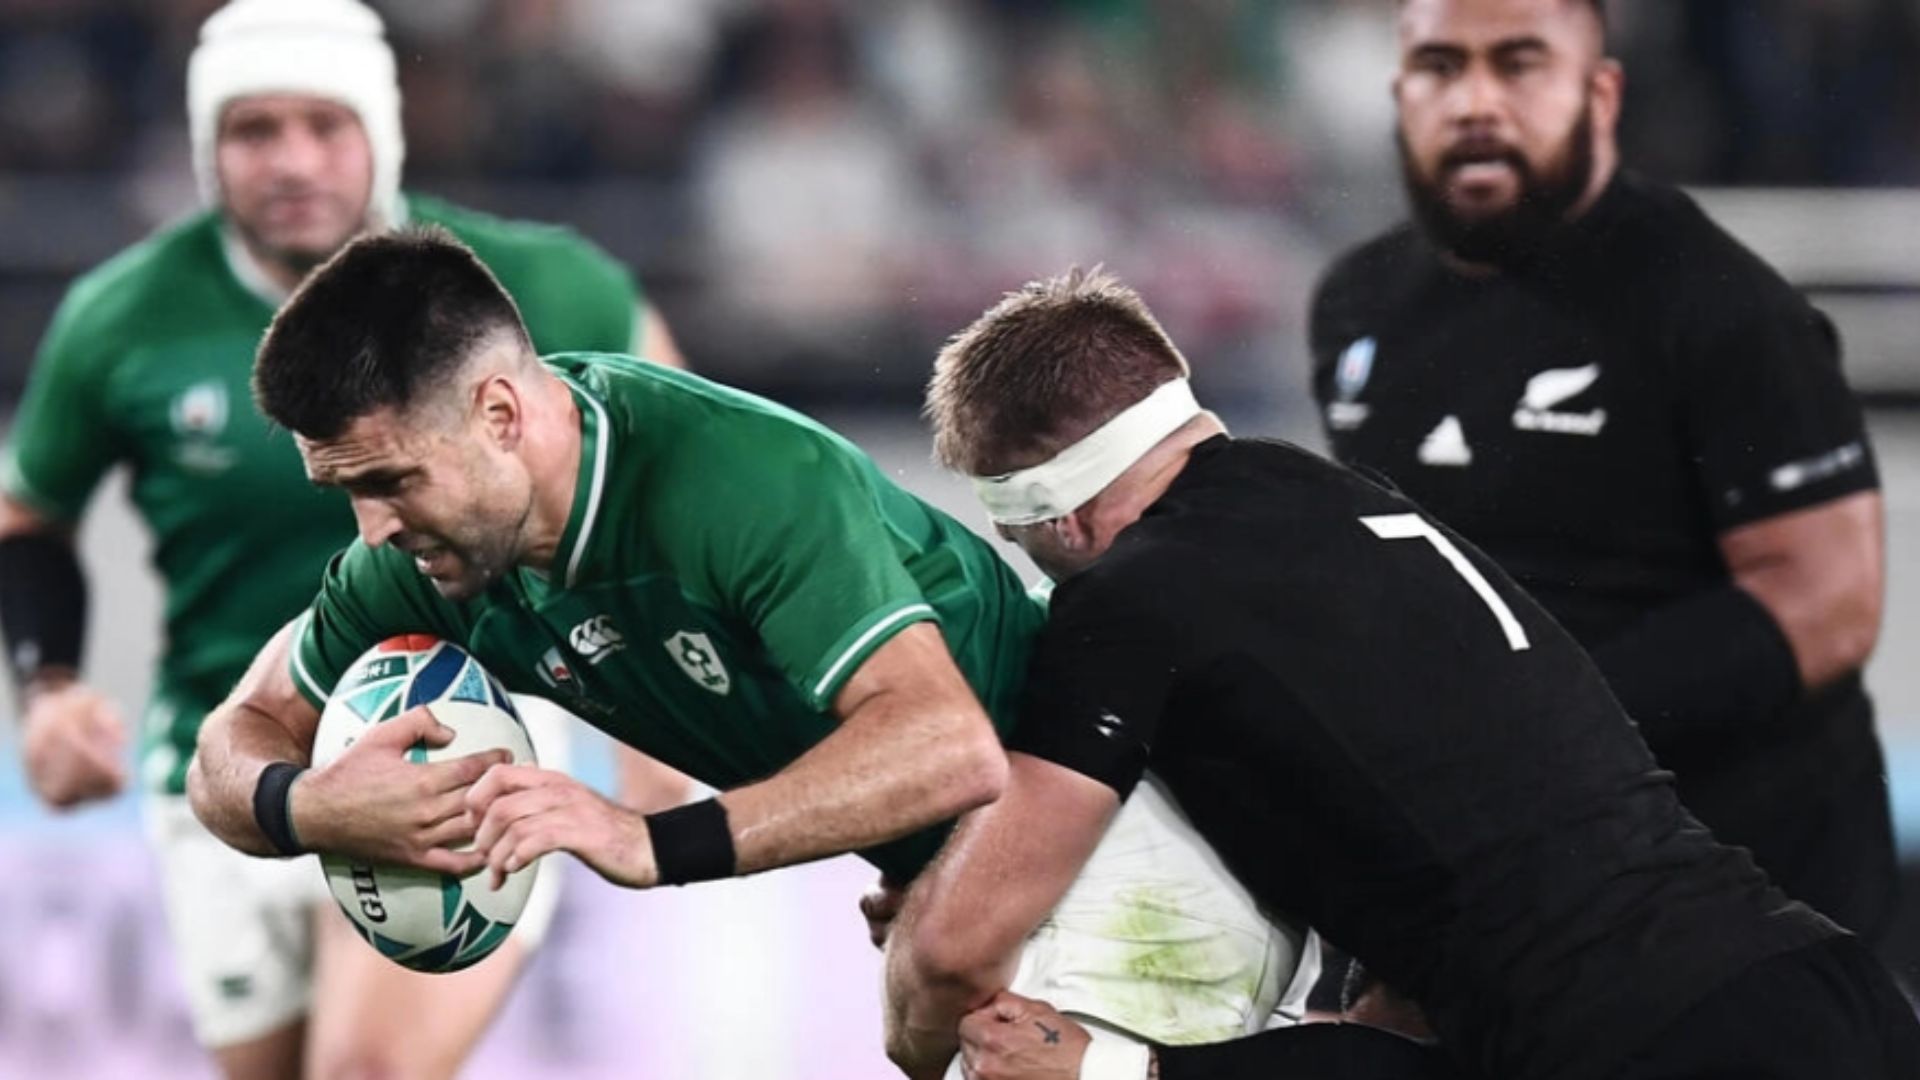 Enduring an onslaught All Blacks get physical against Irelands threat